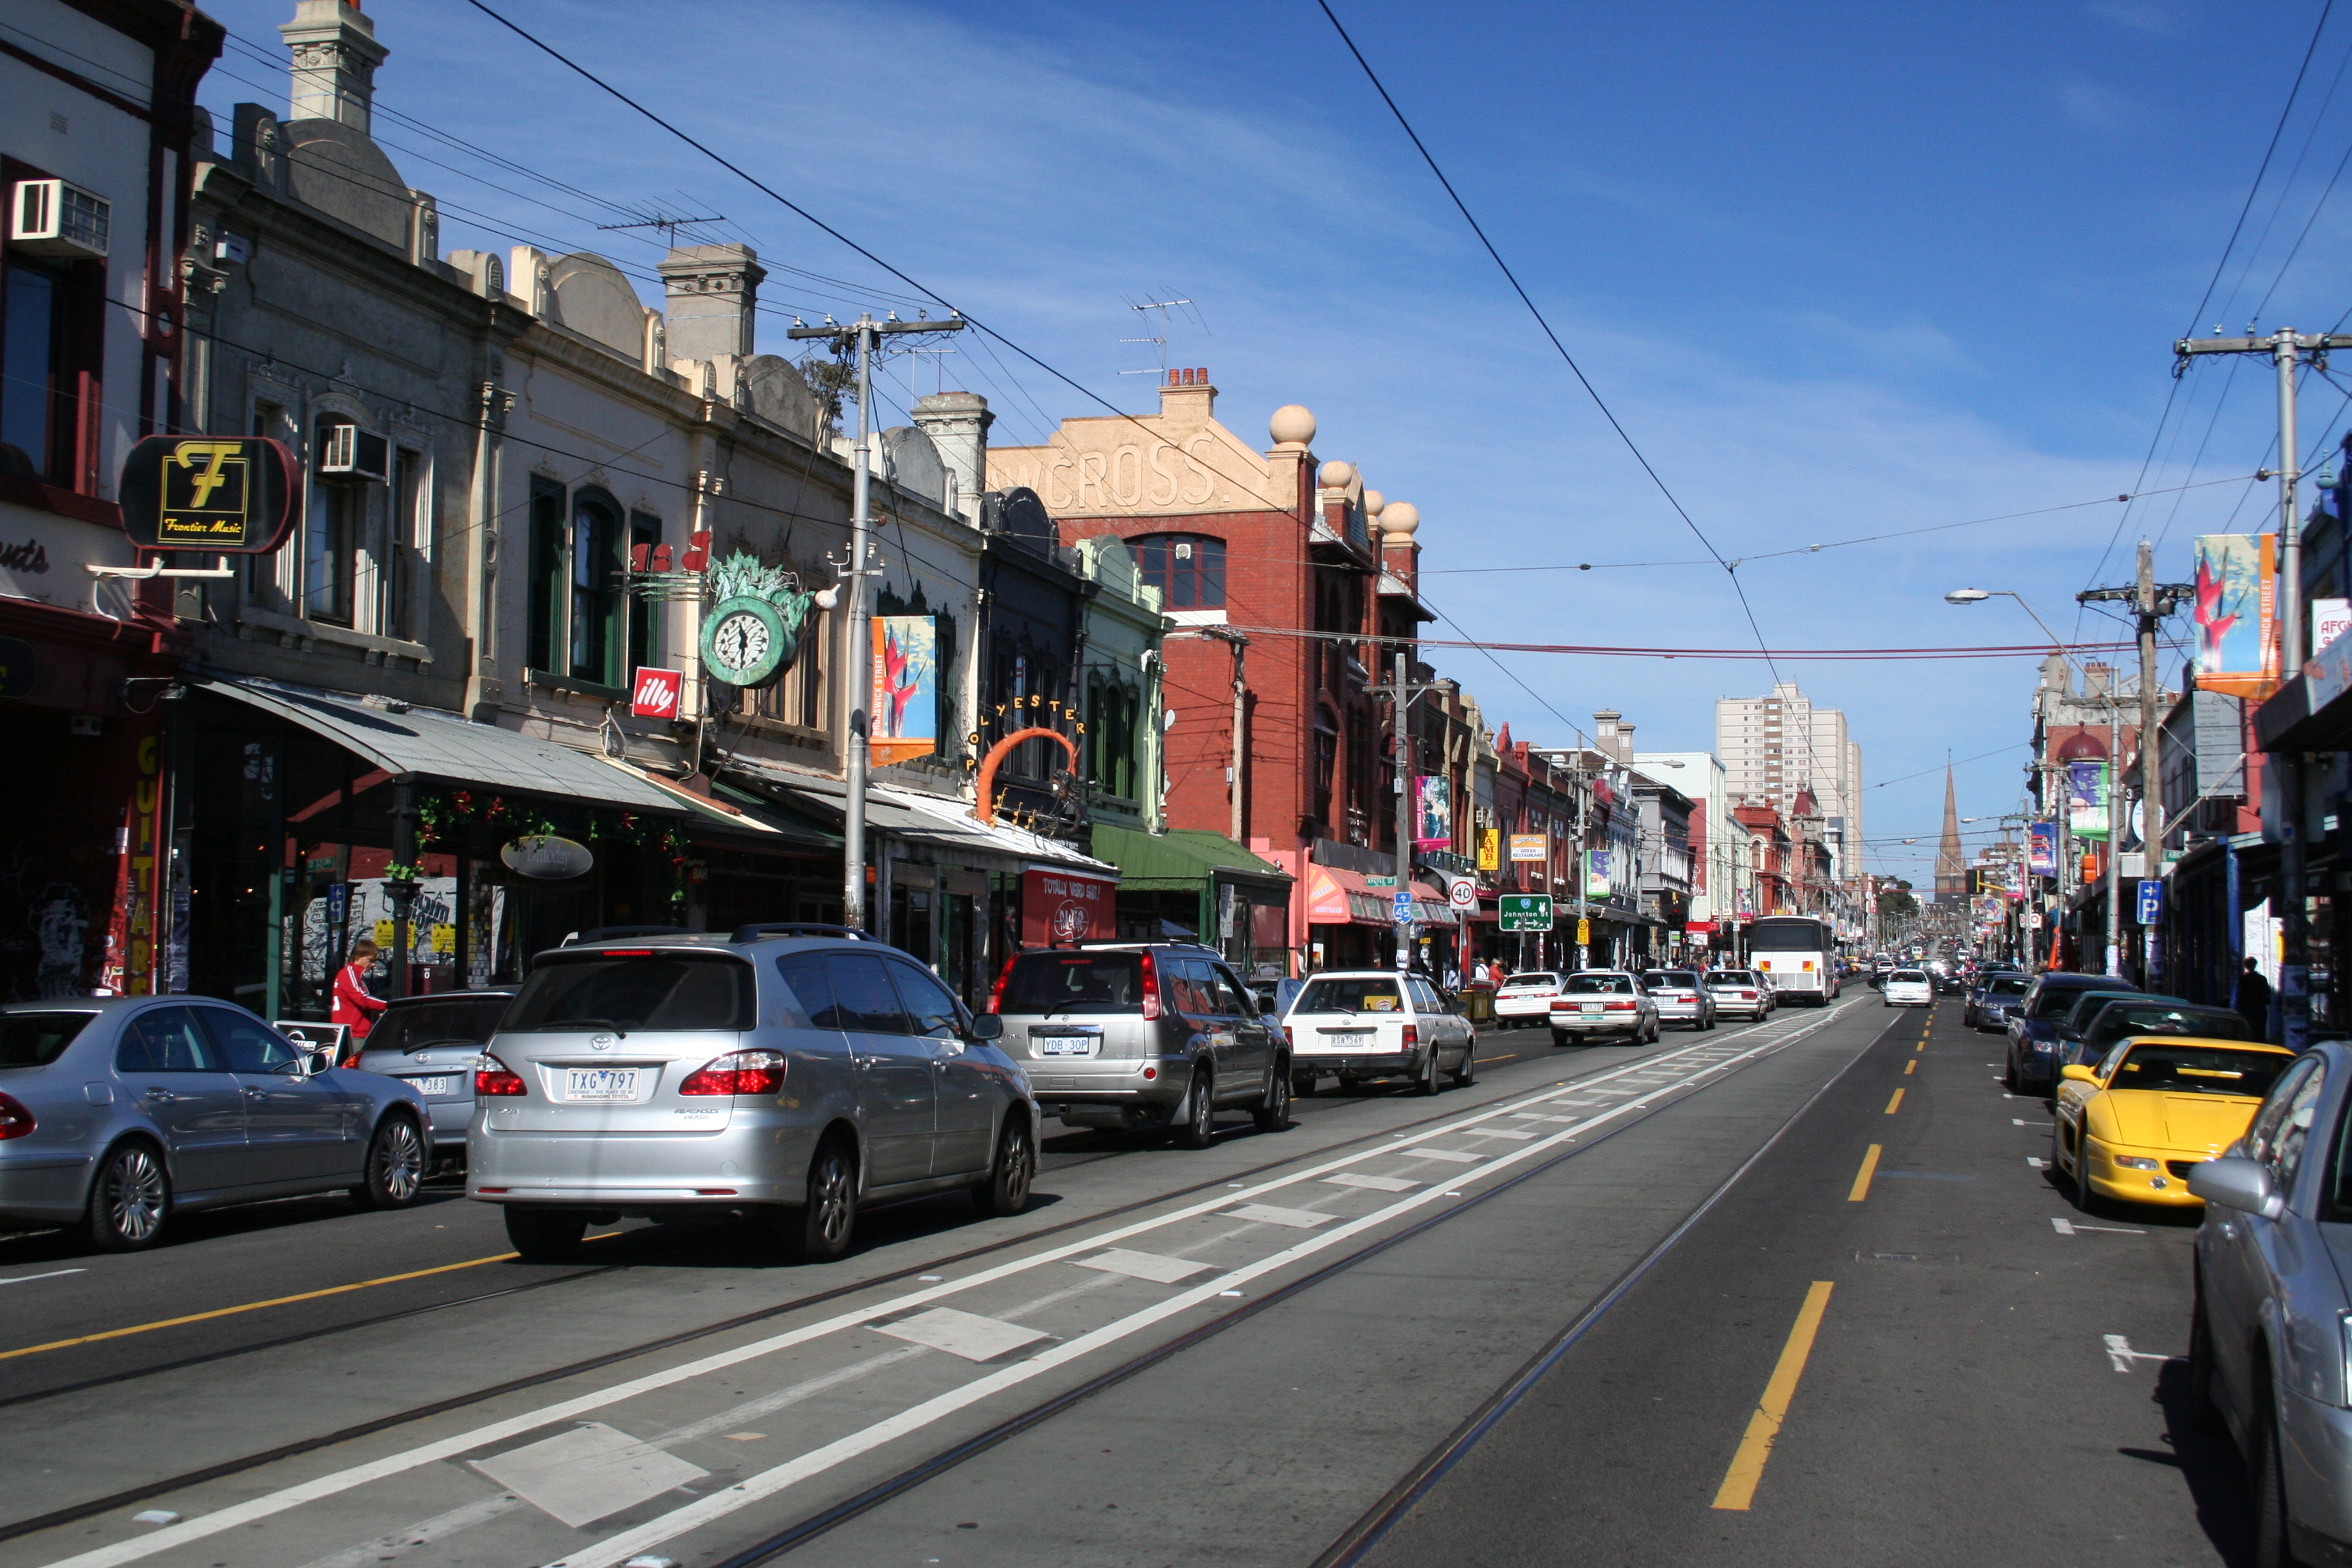 Photo of Brunswick Street, Fitzroy, in Victoria, in the middle of a busy day.